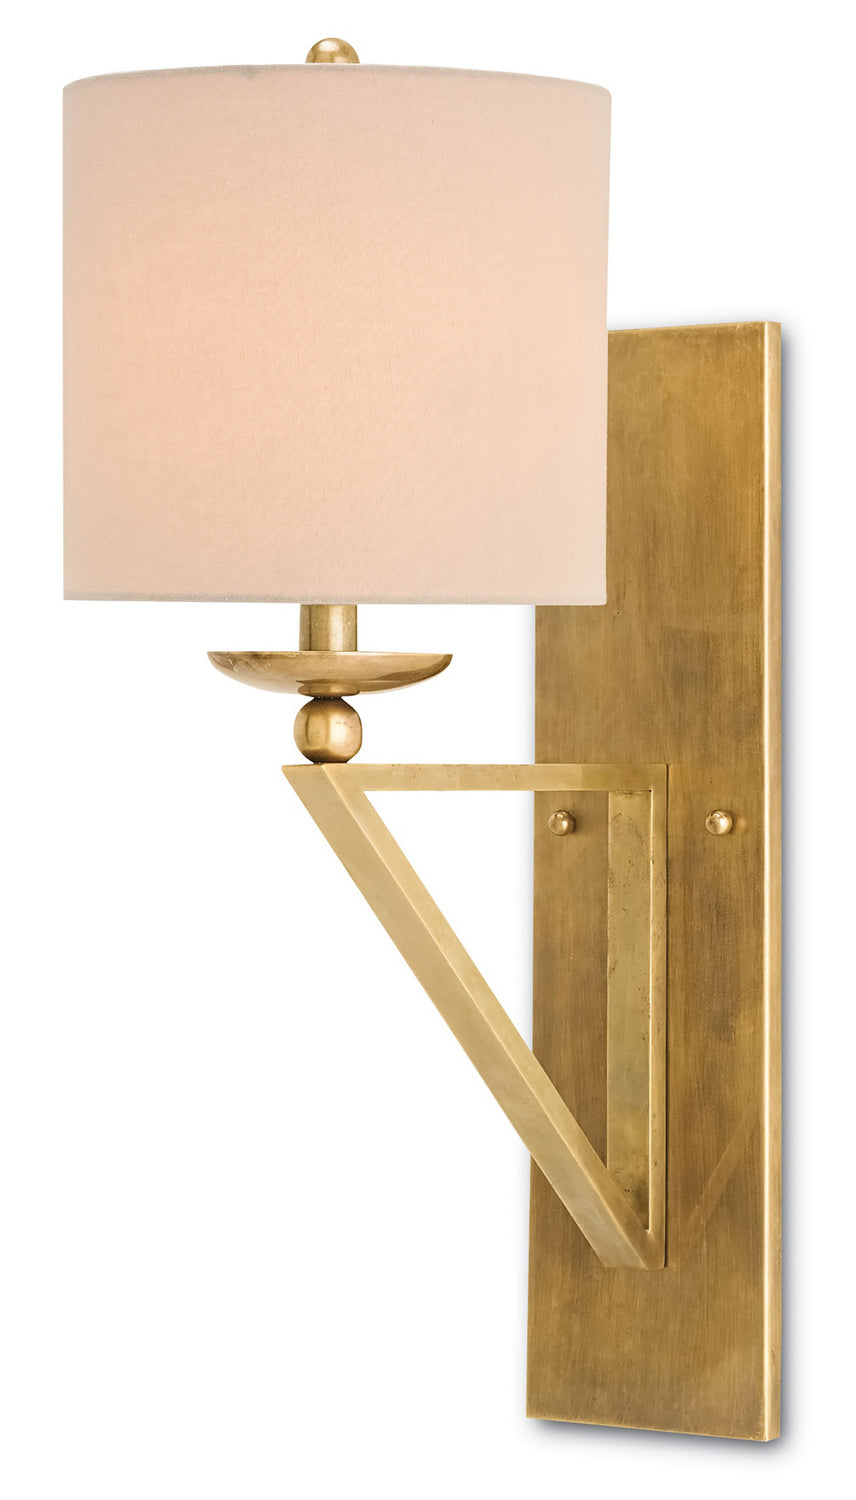 Currey and Company - One Light Wall Sconce - Anthology - Vintage Brass- Union Lighting Luminaires Decor